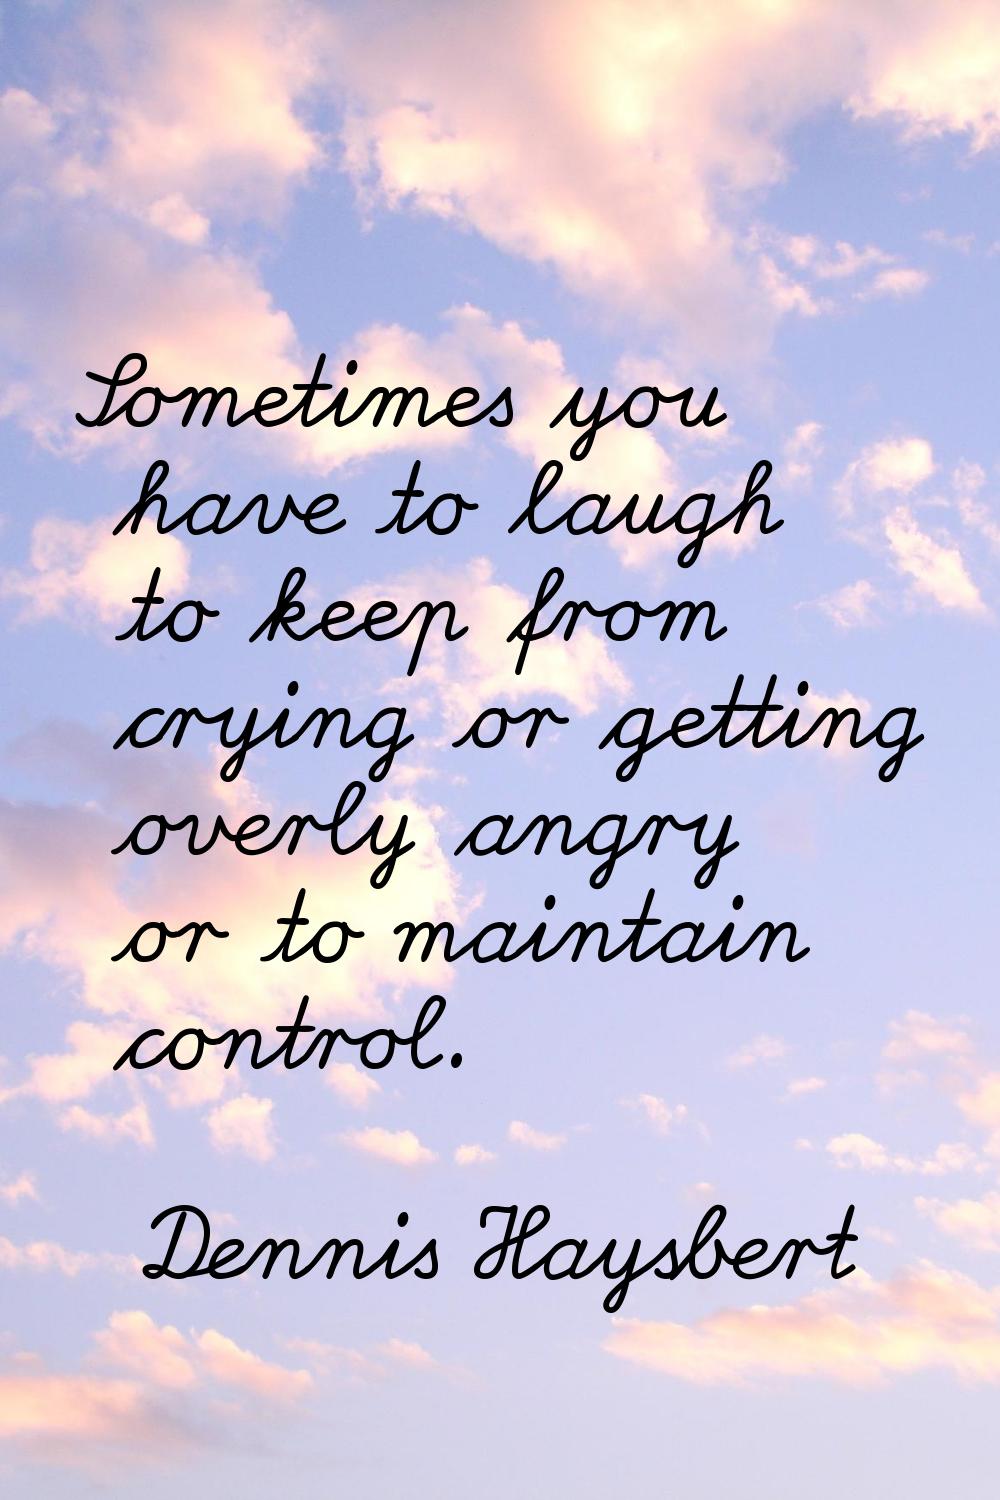 Sometimes you have to laugh to keep from crying or getting overly angry or to maintain control.